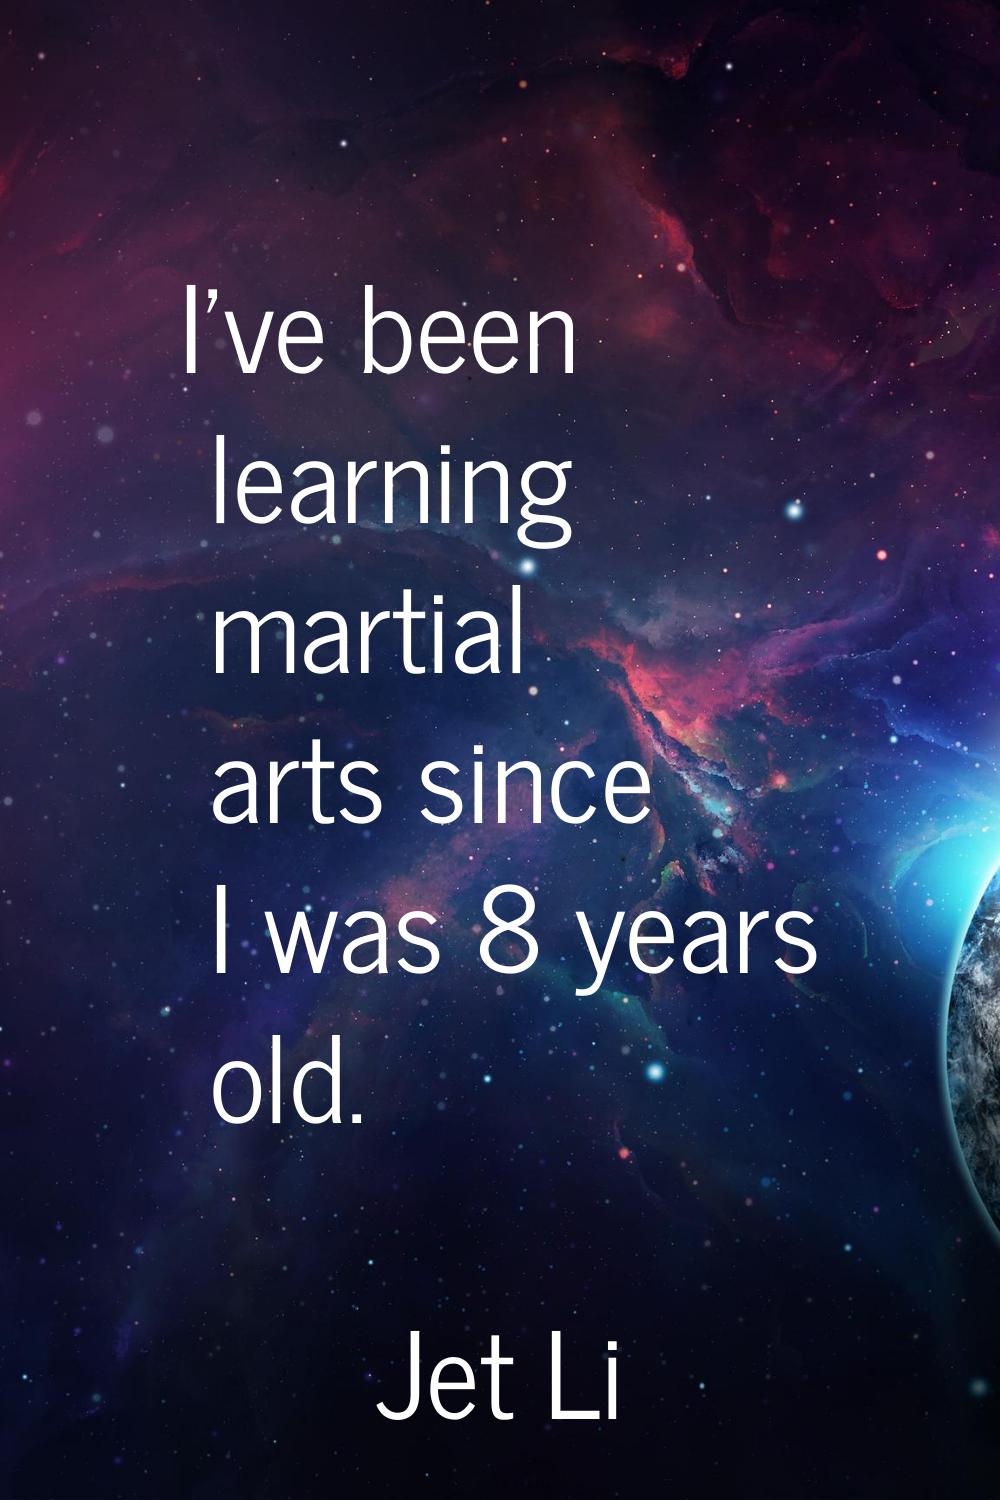 I've been learning martial arts since I was 8 years old.